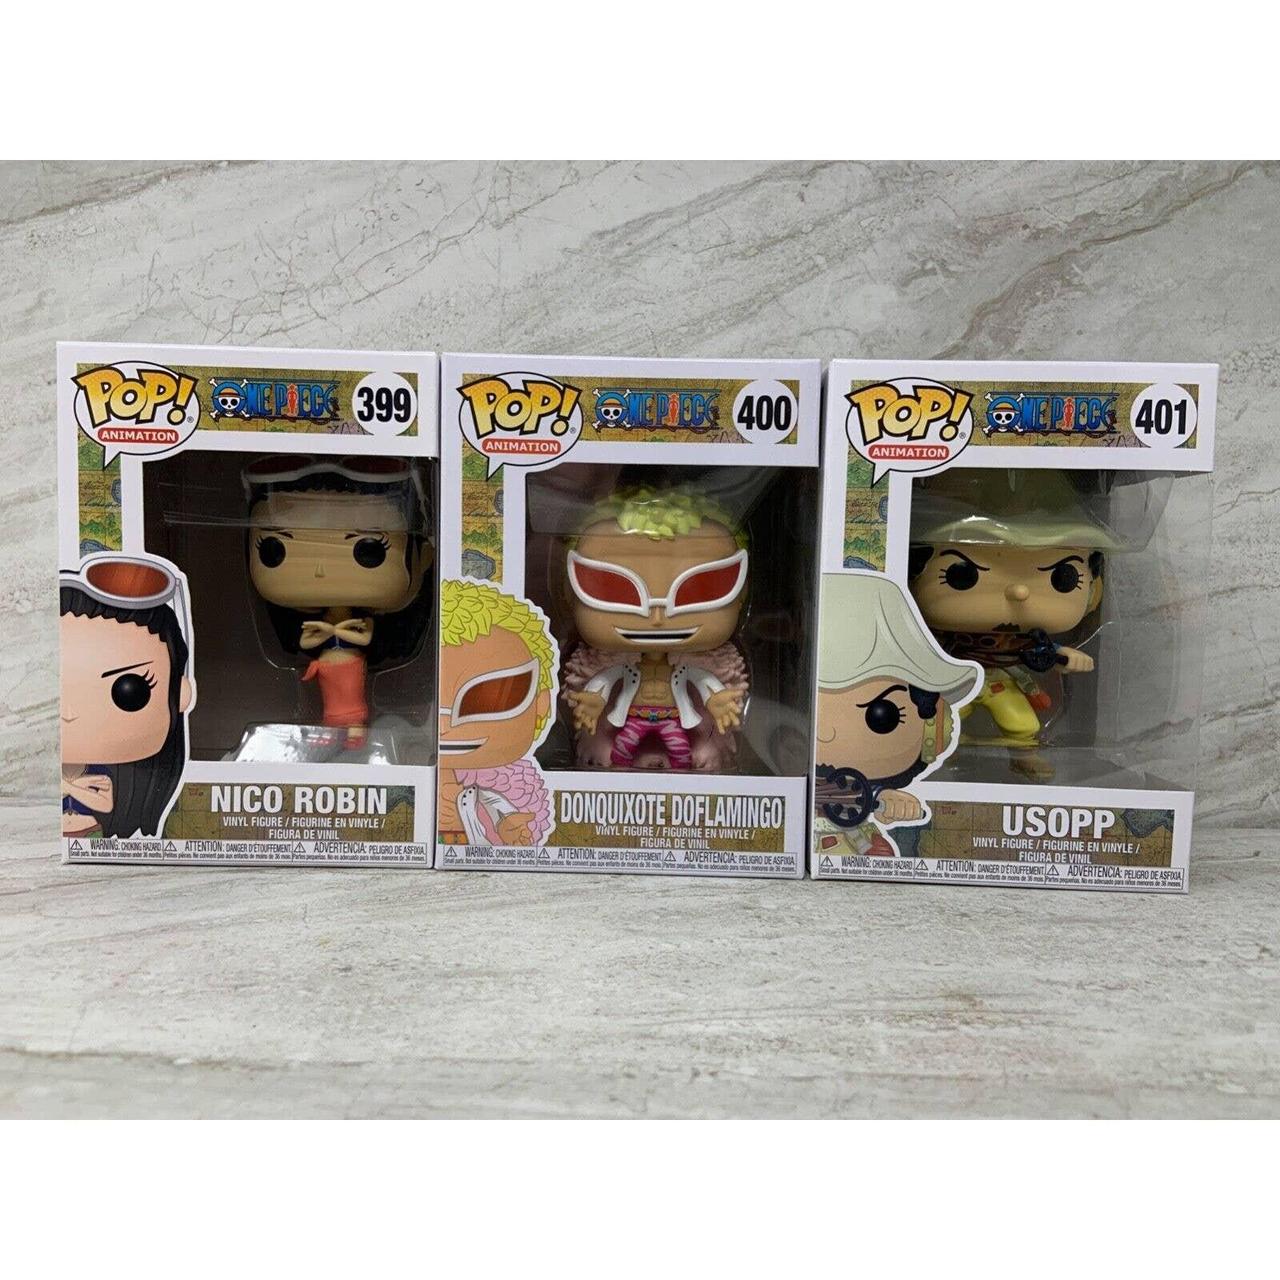 One Piece – Pops of the Galaxy